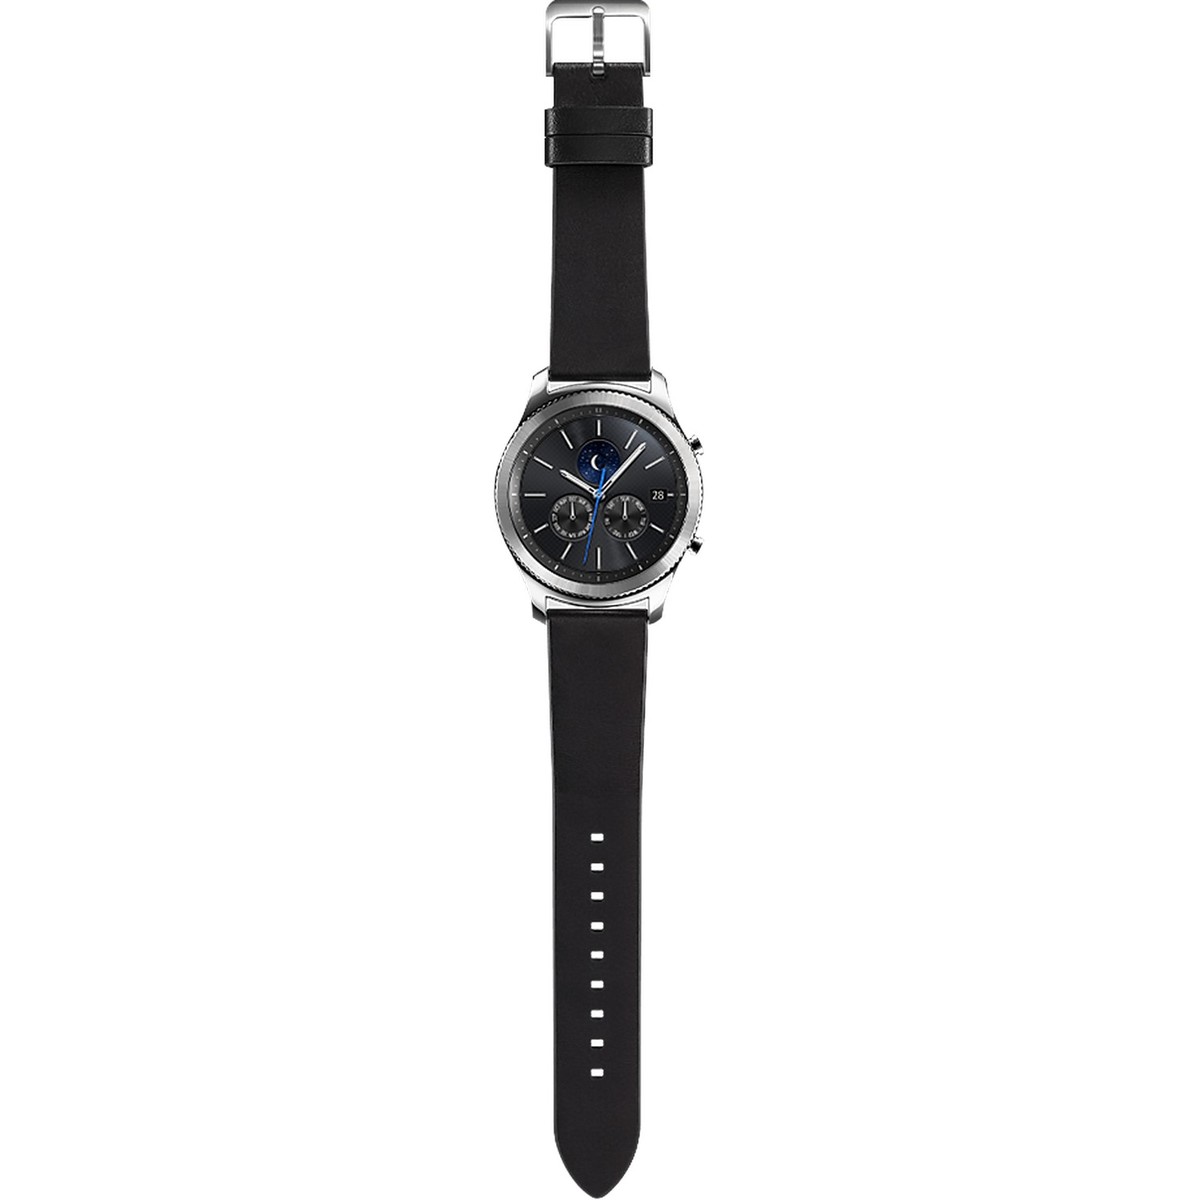 Samsung Gear S3 Classic Silver Case with Black Strap